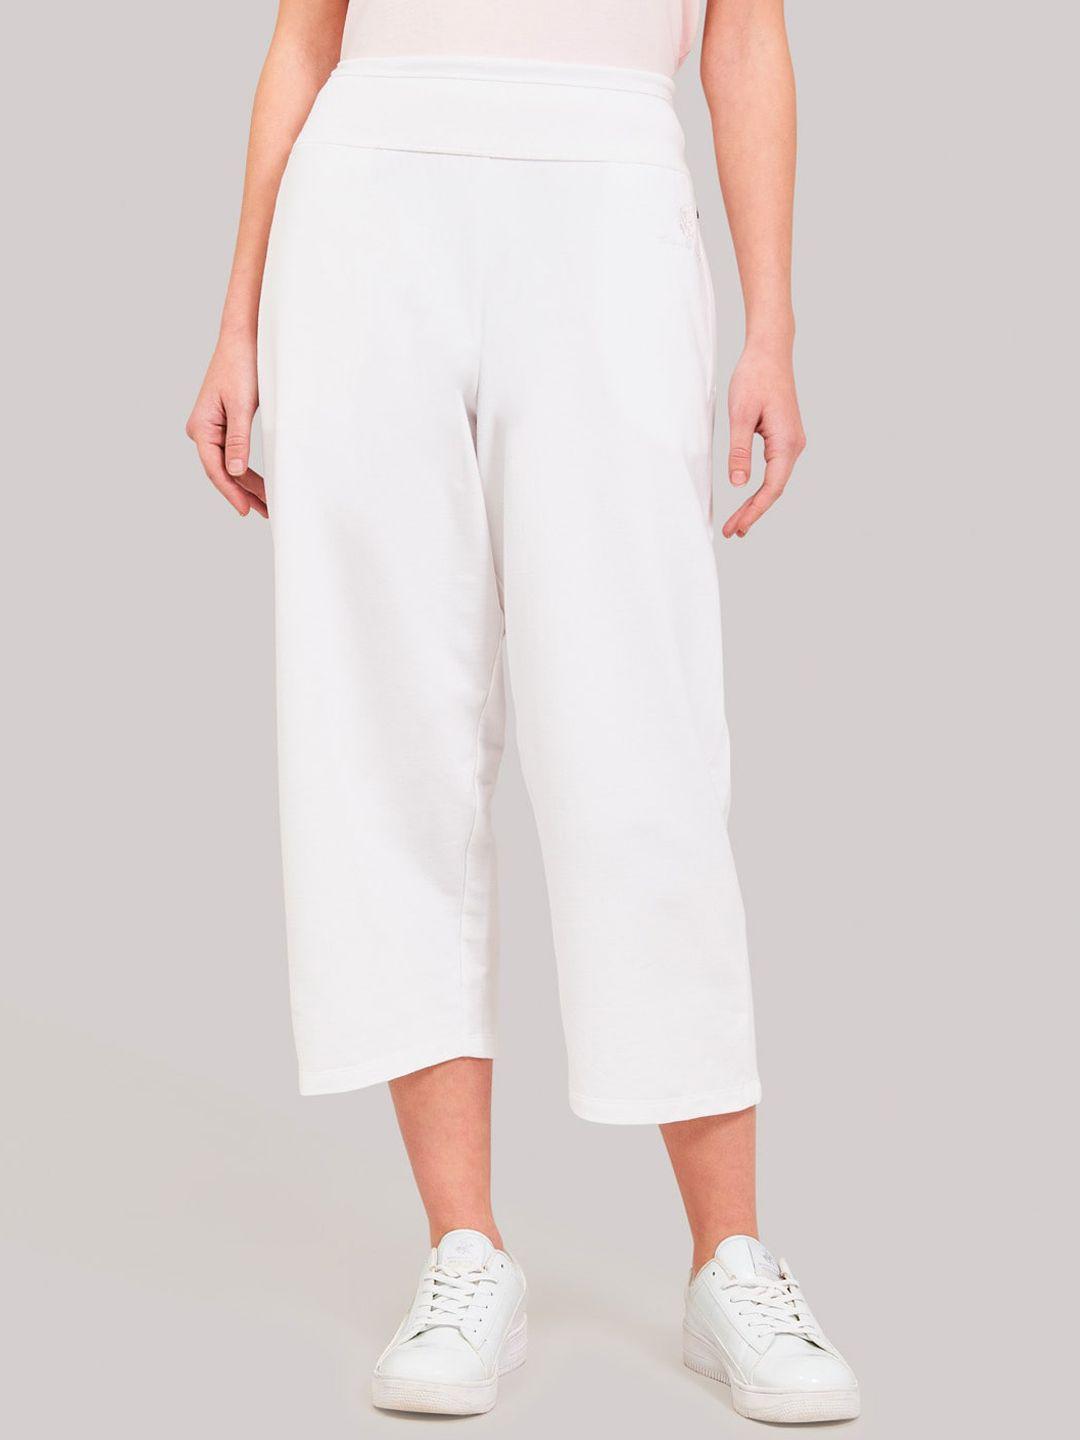 beverly hills polo club women white regular fit solid culottes